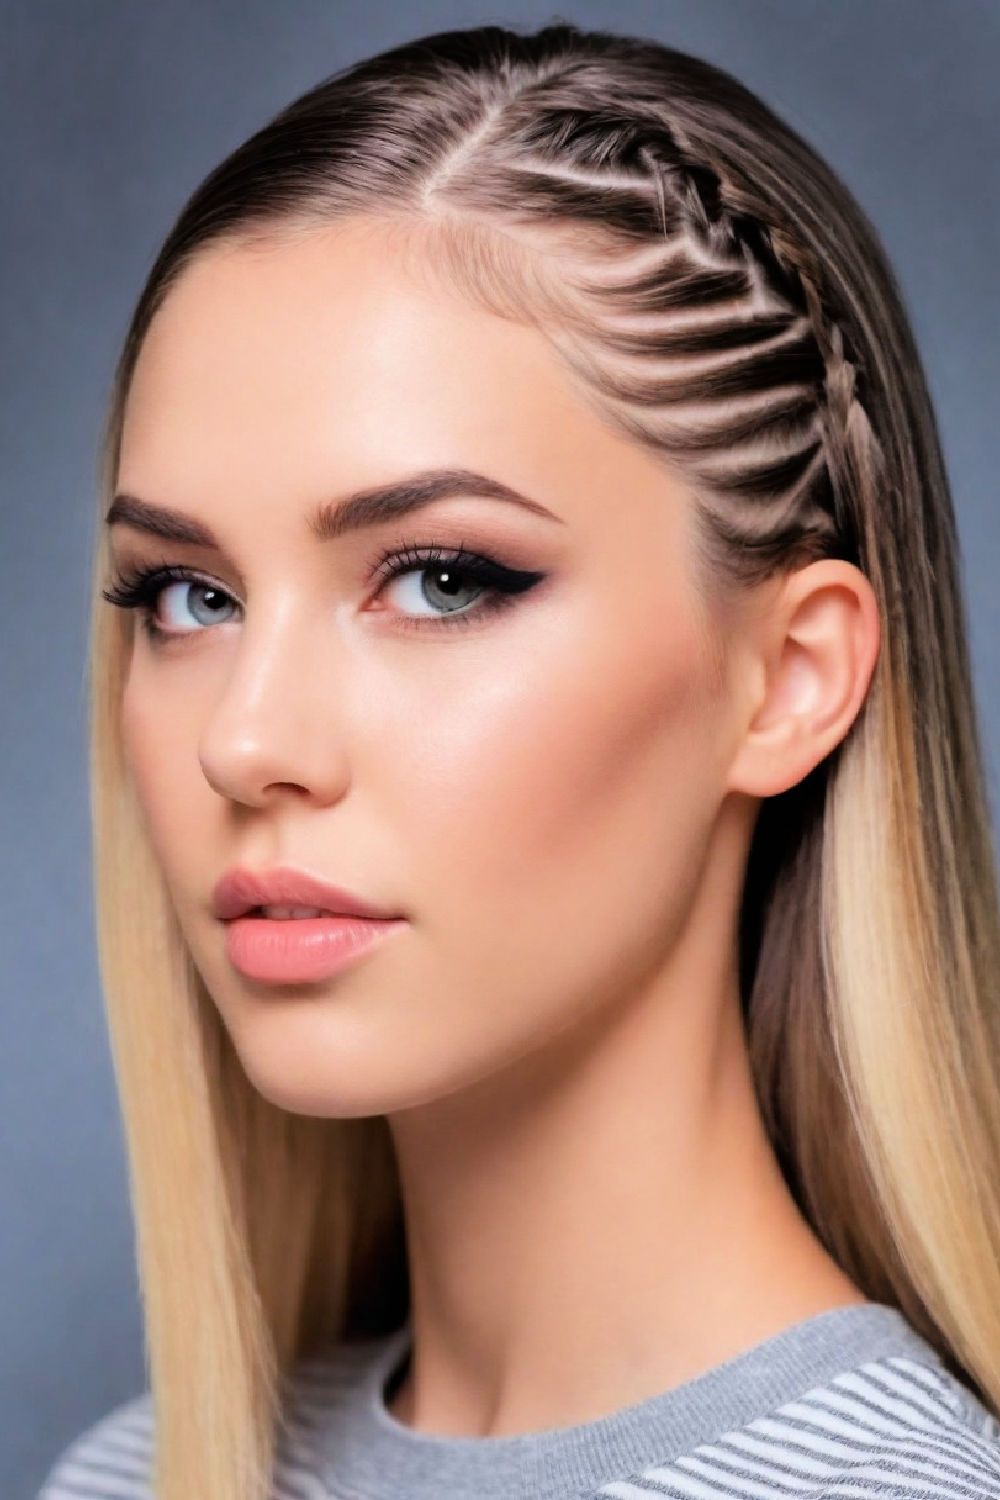 zigzag part hairstyle for long faces